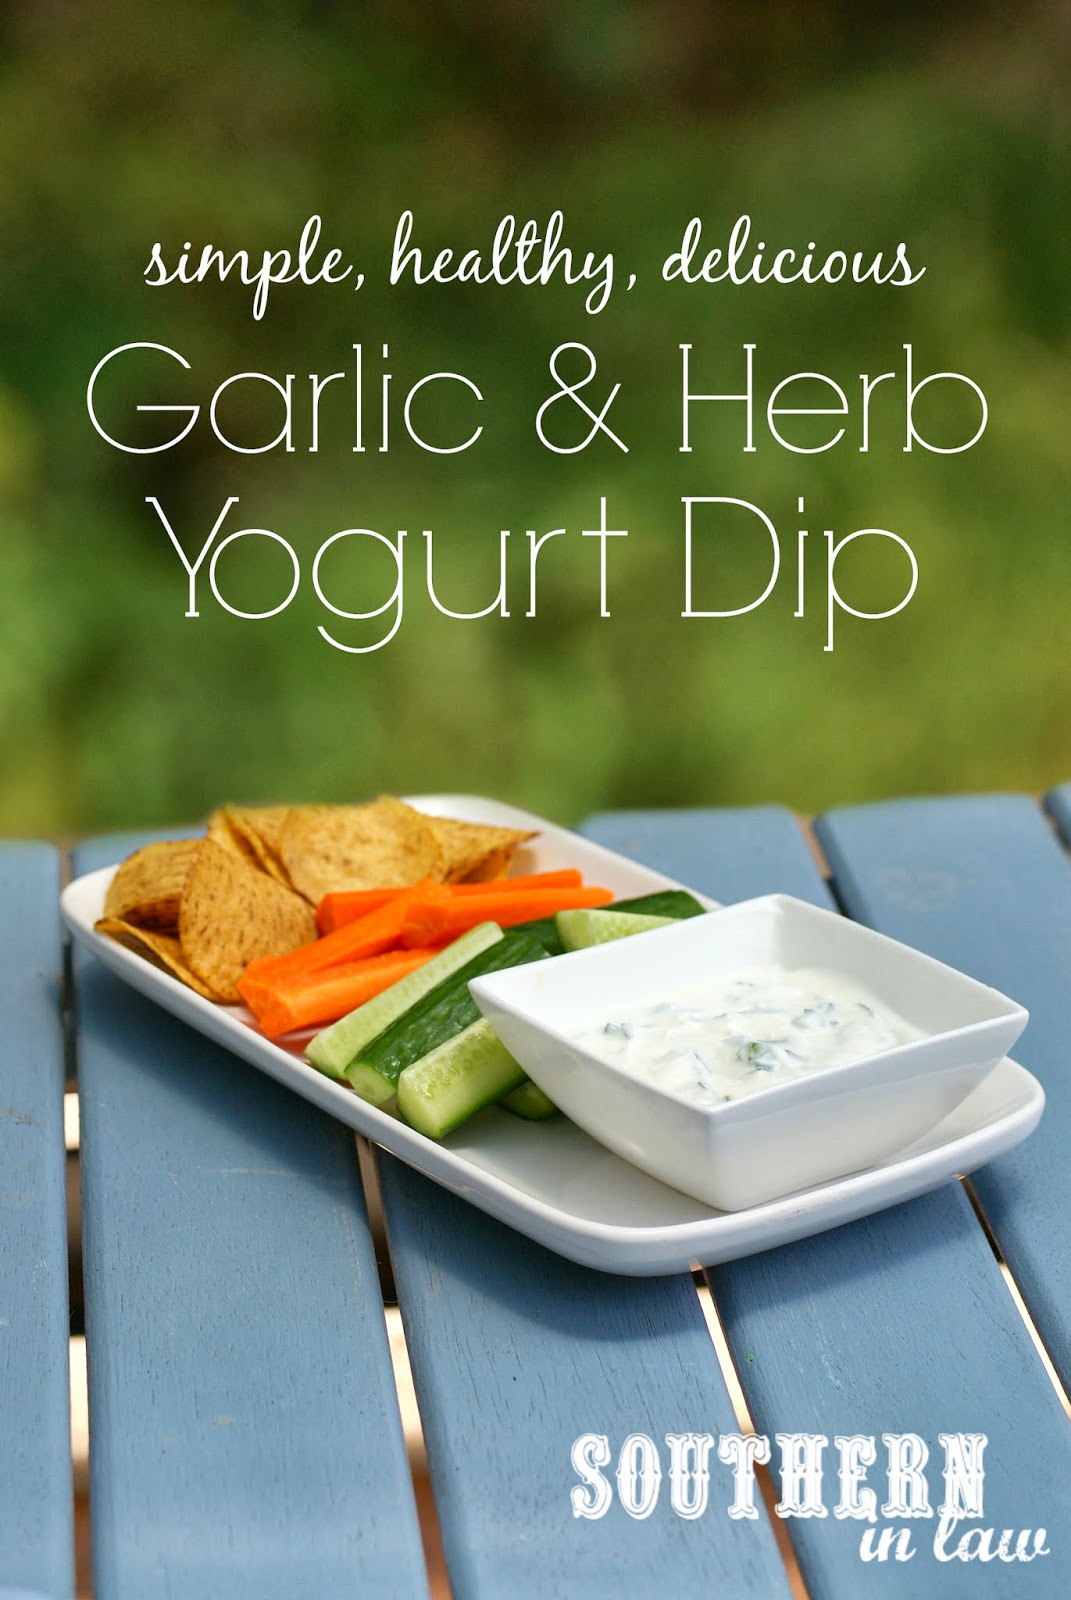 Healthy Garlic and Herb Yogurt Dip with Corn Chips and Vegetable Crudites - Healthy, Gluten Free, Low Fat, Clean Eating Friendly, Sugar Free